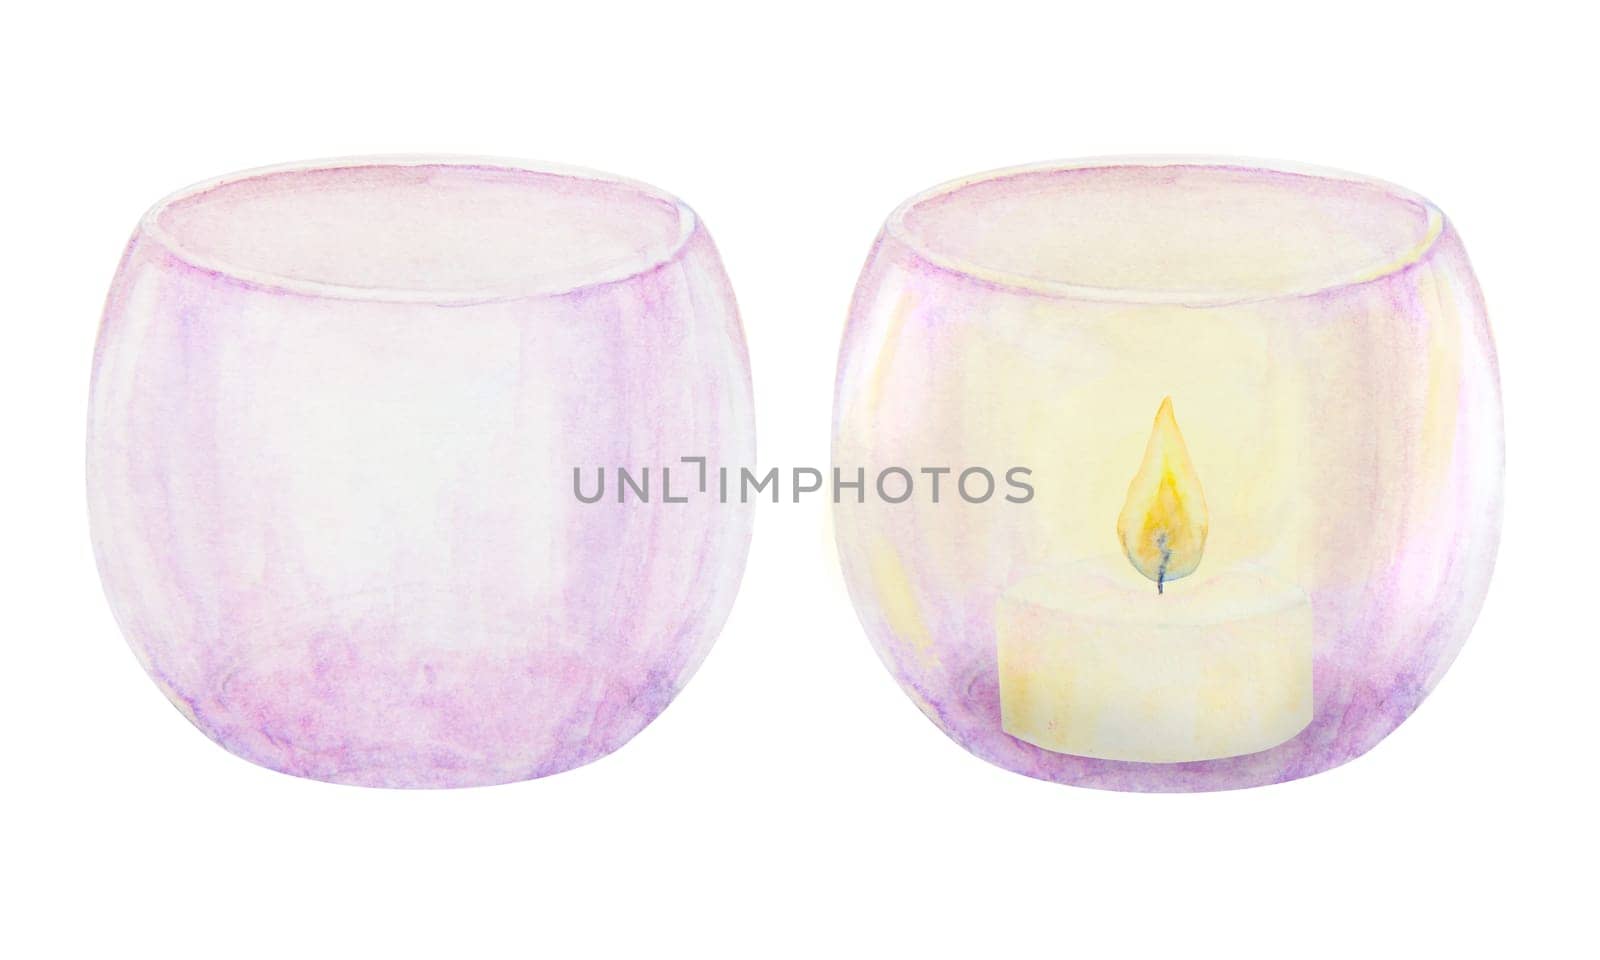 Set of violet glass candlestick and vase. Hand drawn watercolor illustration. Good for event, Christmas decoration, romantic, wedding designs by florainlove_art